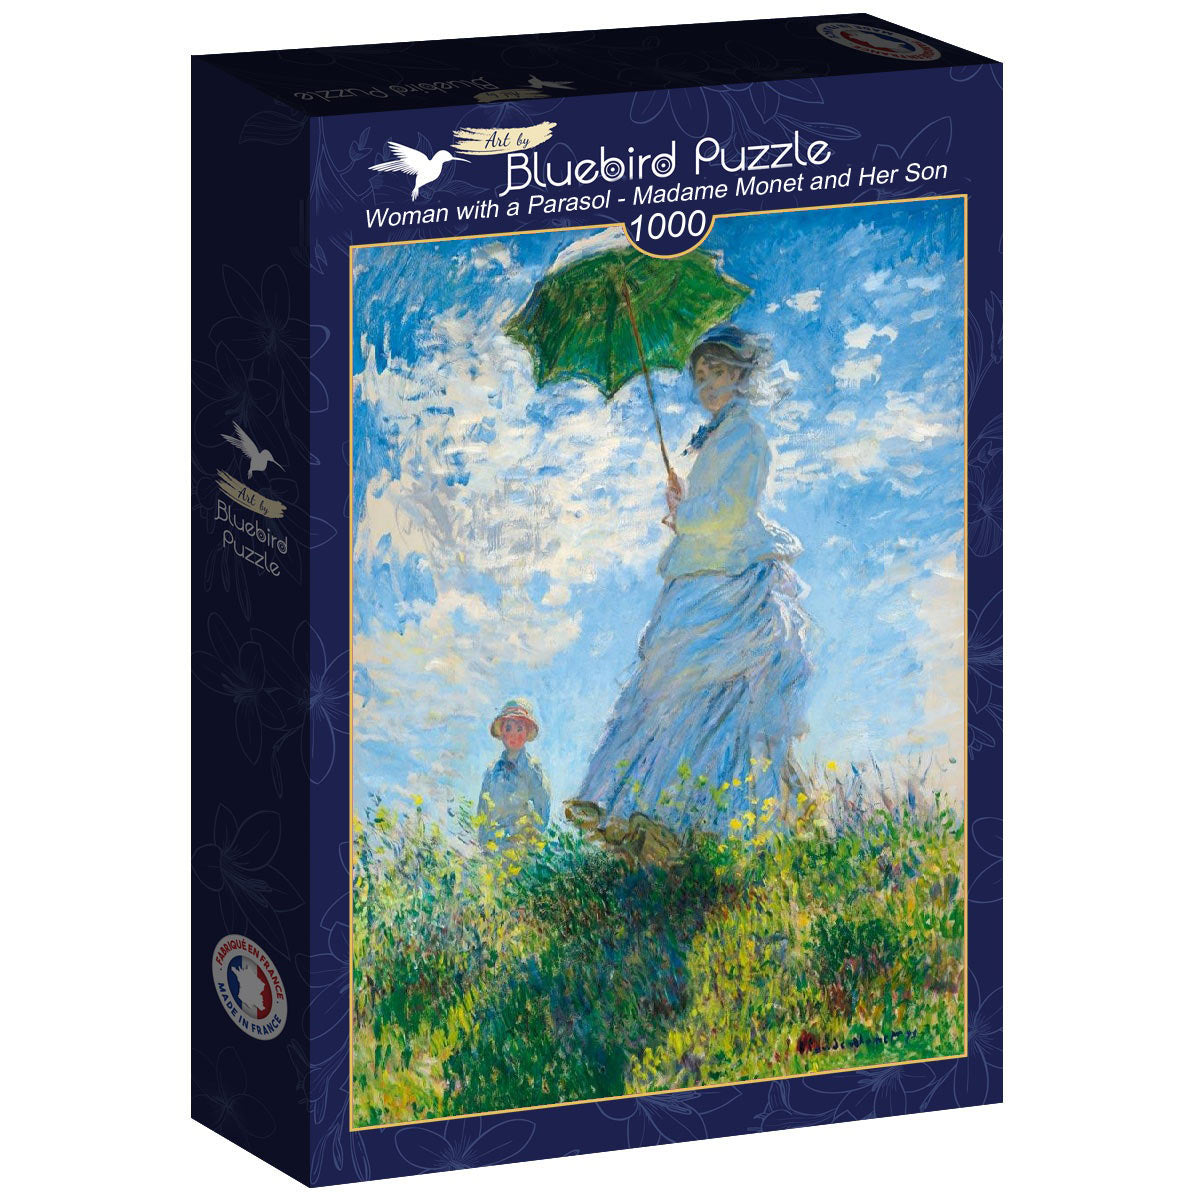 Bluebird - Claude Monet - Woman with a Parasol - Madame Monet and Her Son - 1000 piece jigsaw puzzle